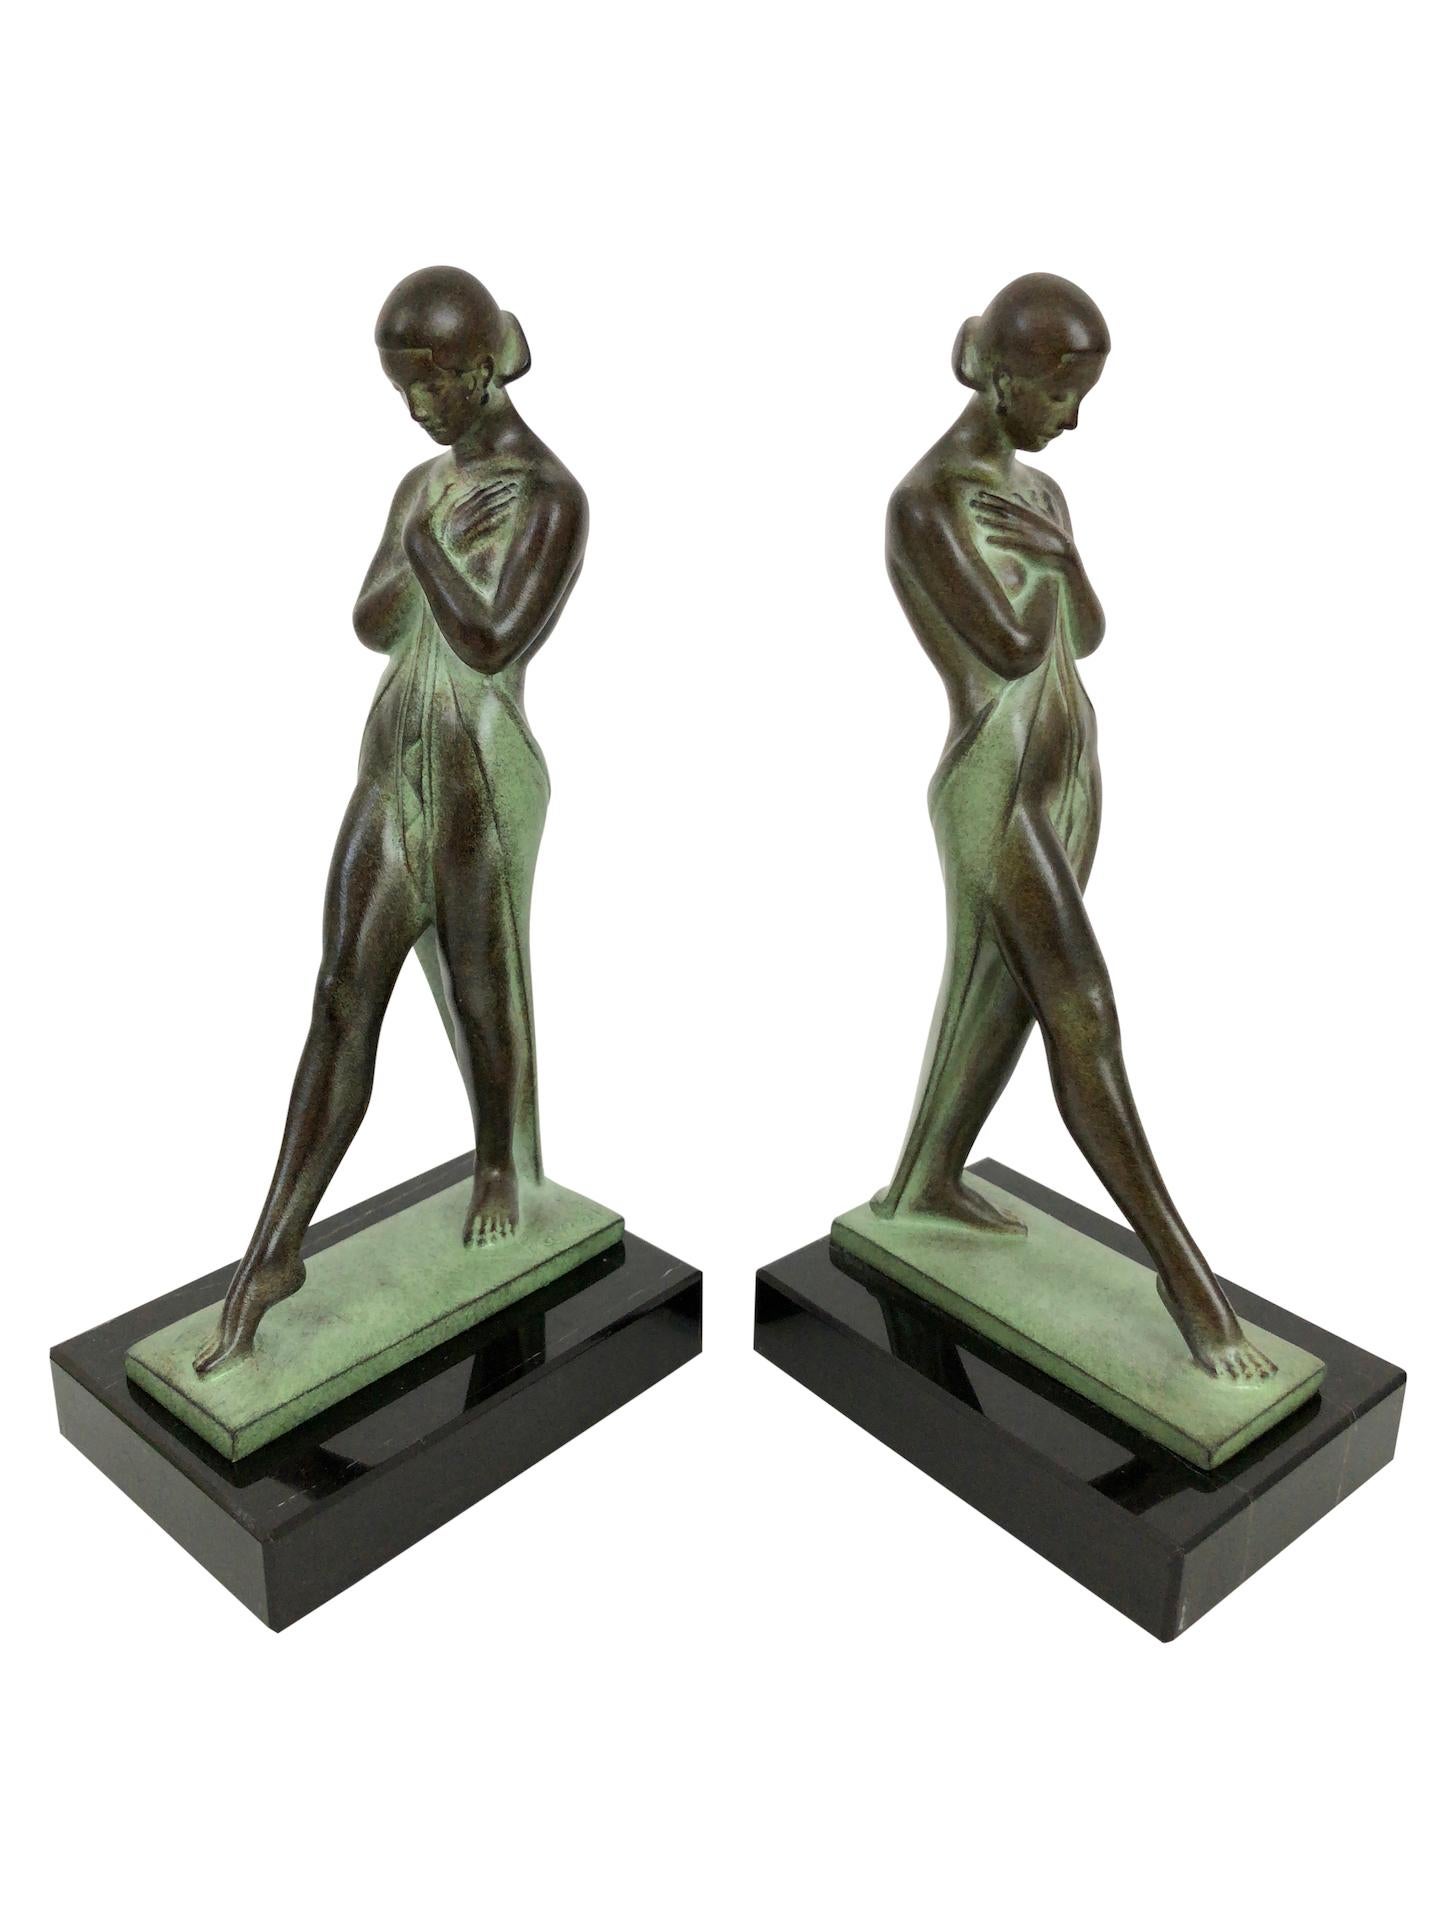 “Meditation”
Designed in France during the roaring 1920s by “Fayral”, which is one of the pseudonyms from “Pierre Le Faguays” (1892-1962), signed
Original “Max Le Verrier”
Art Deco style, France 

Bookends made in “Régule” (spelter)
Socle in